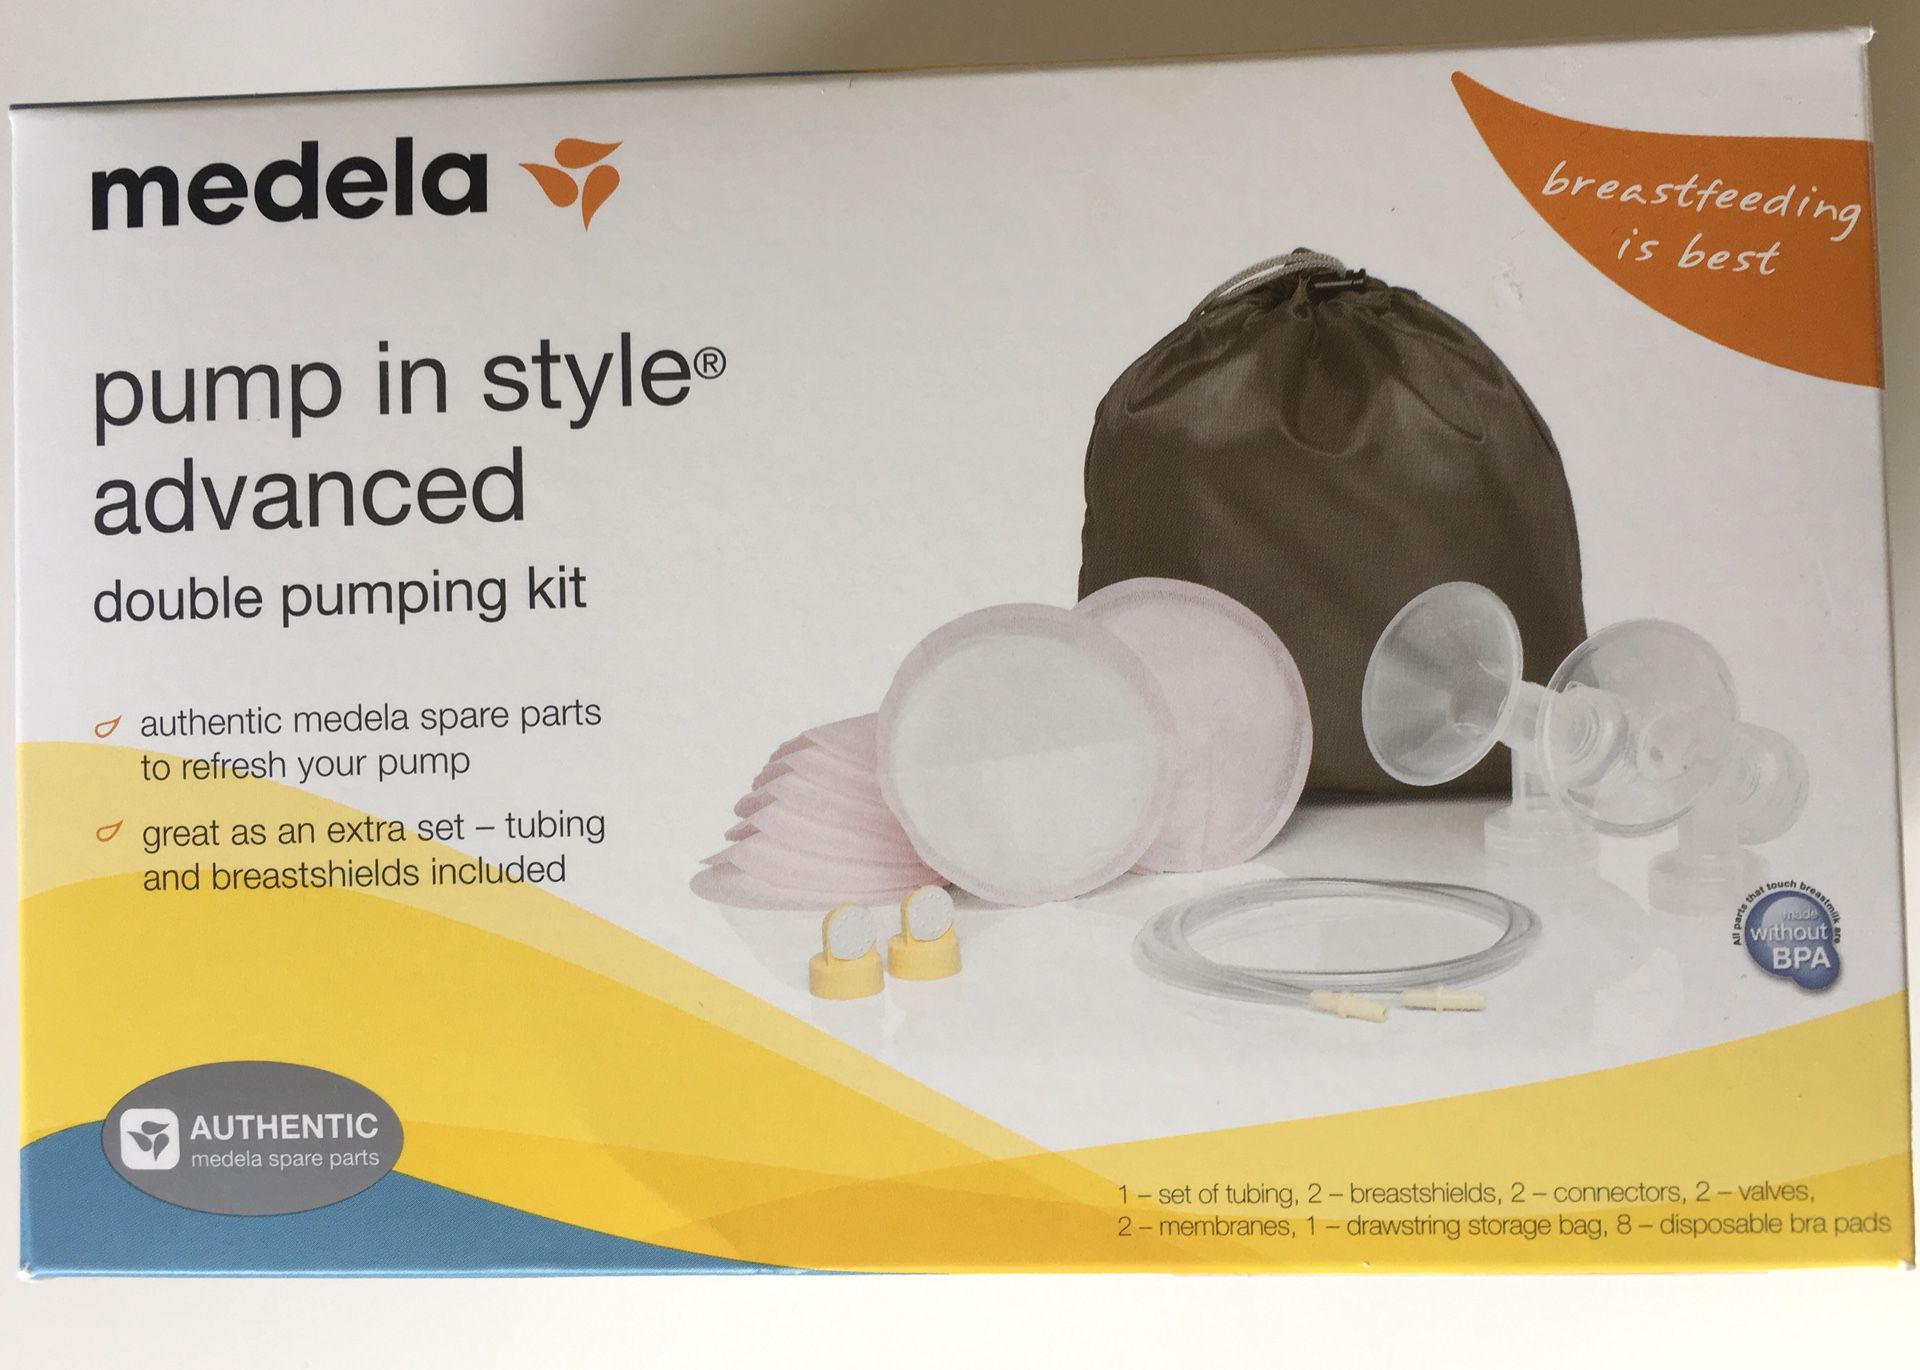 Medela pump in style Advanced double pumping kit